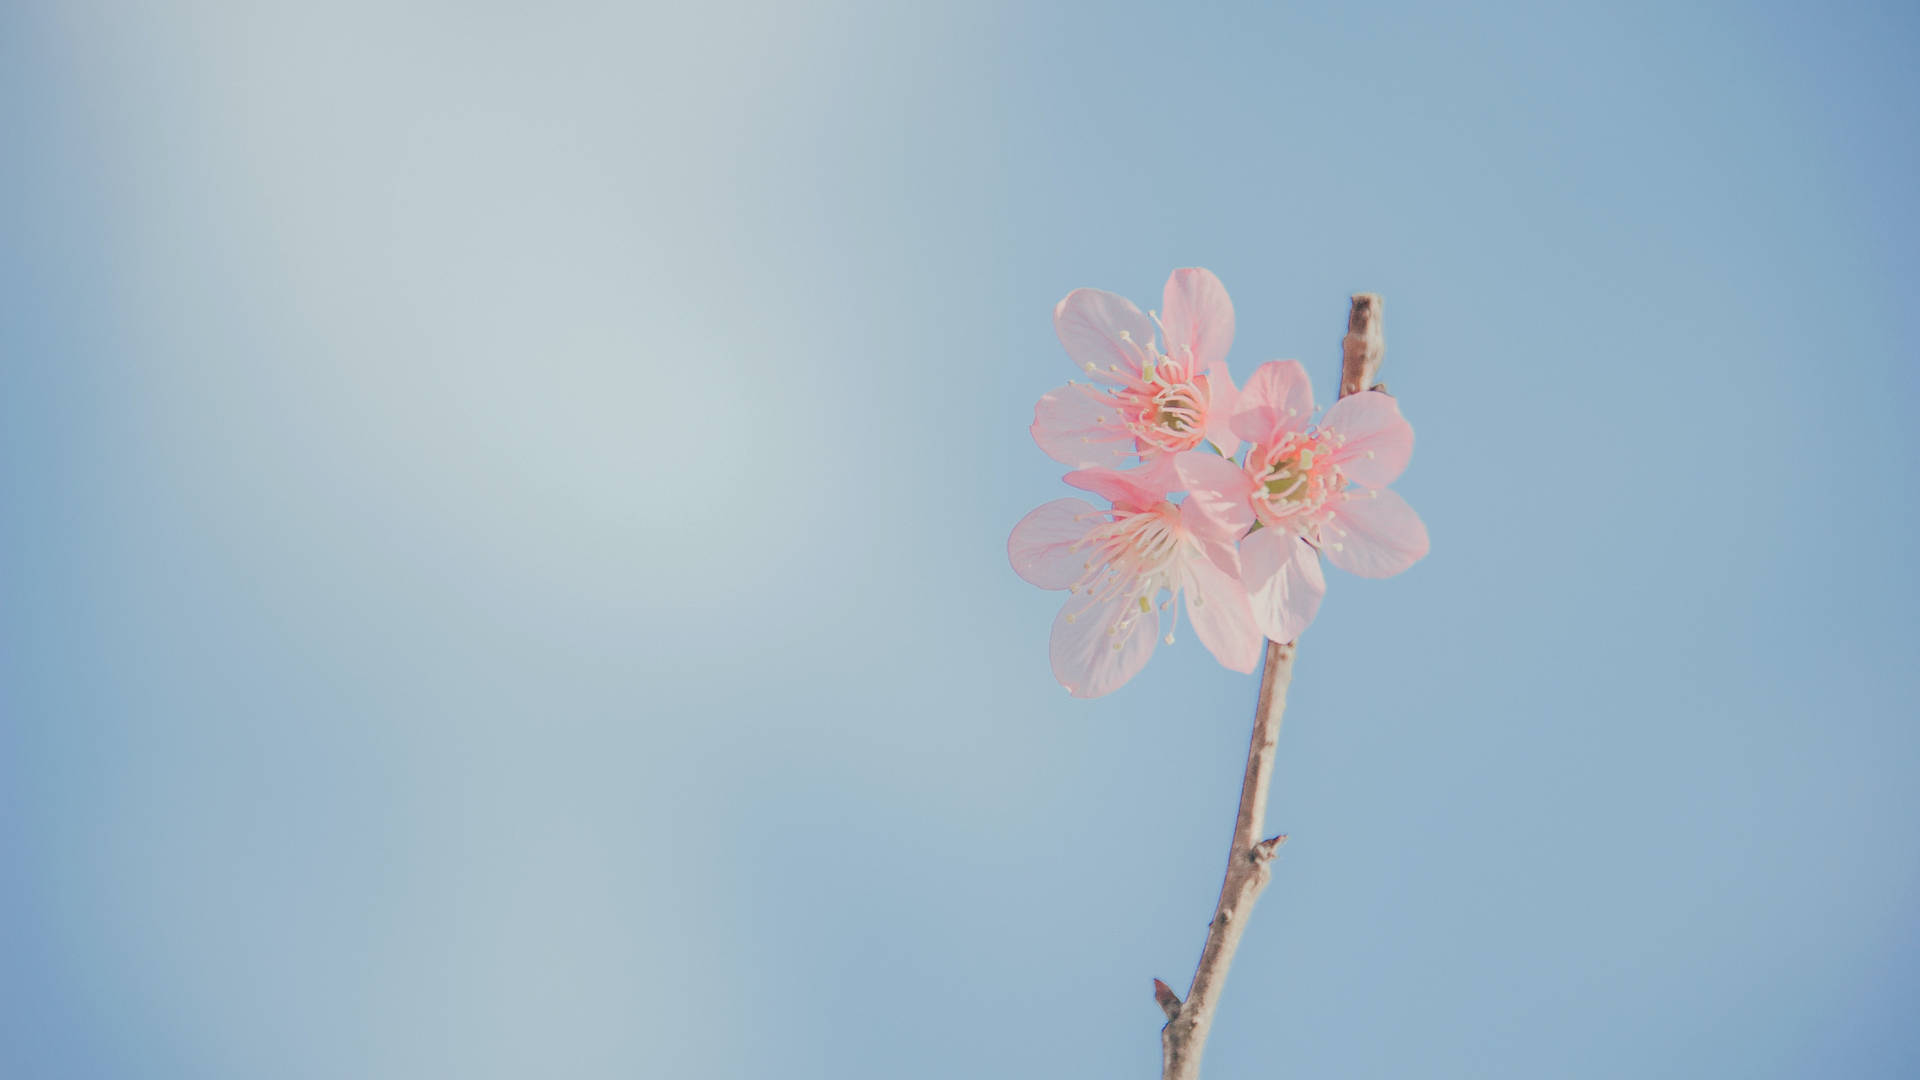 Blue Pastel Aesthetic Pink Flower Background